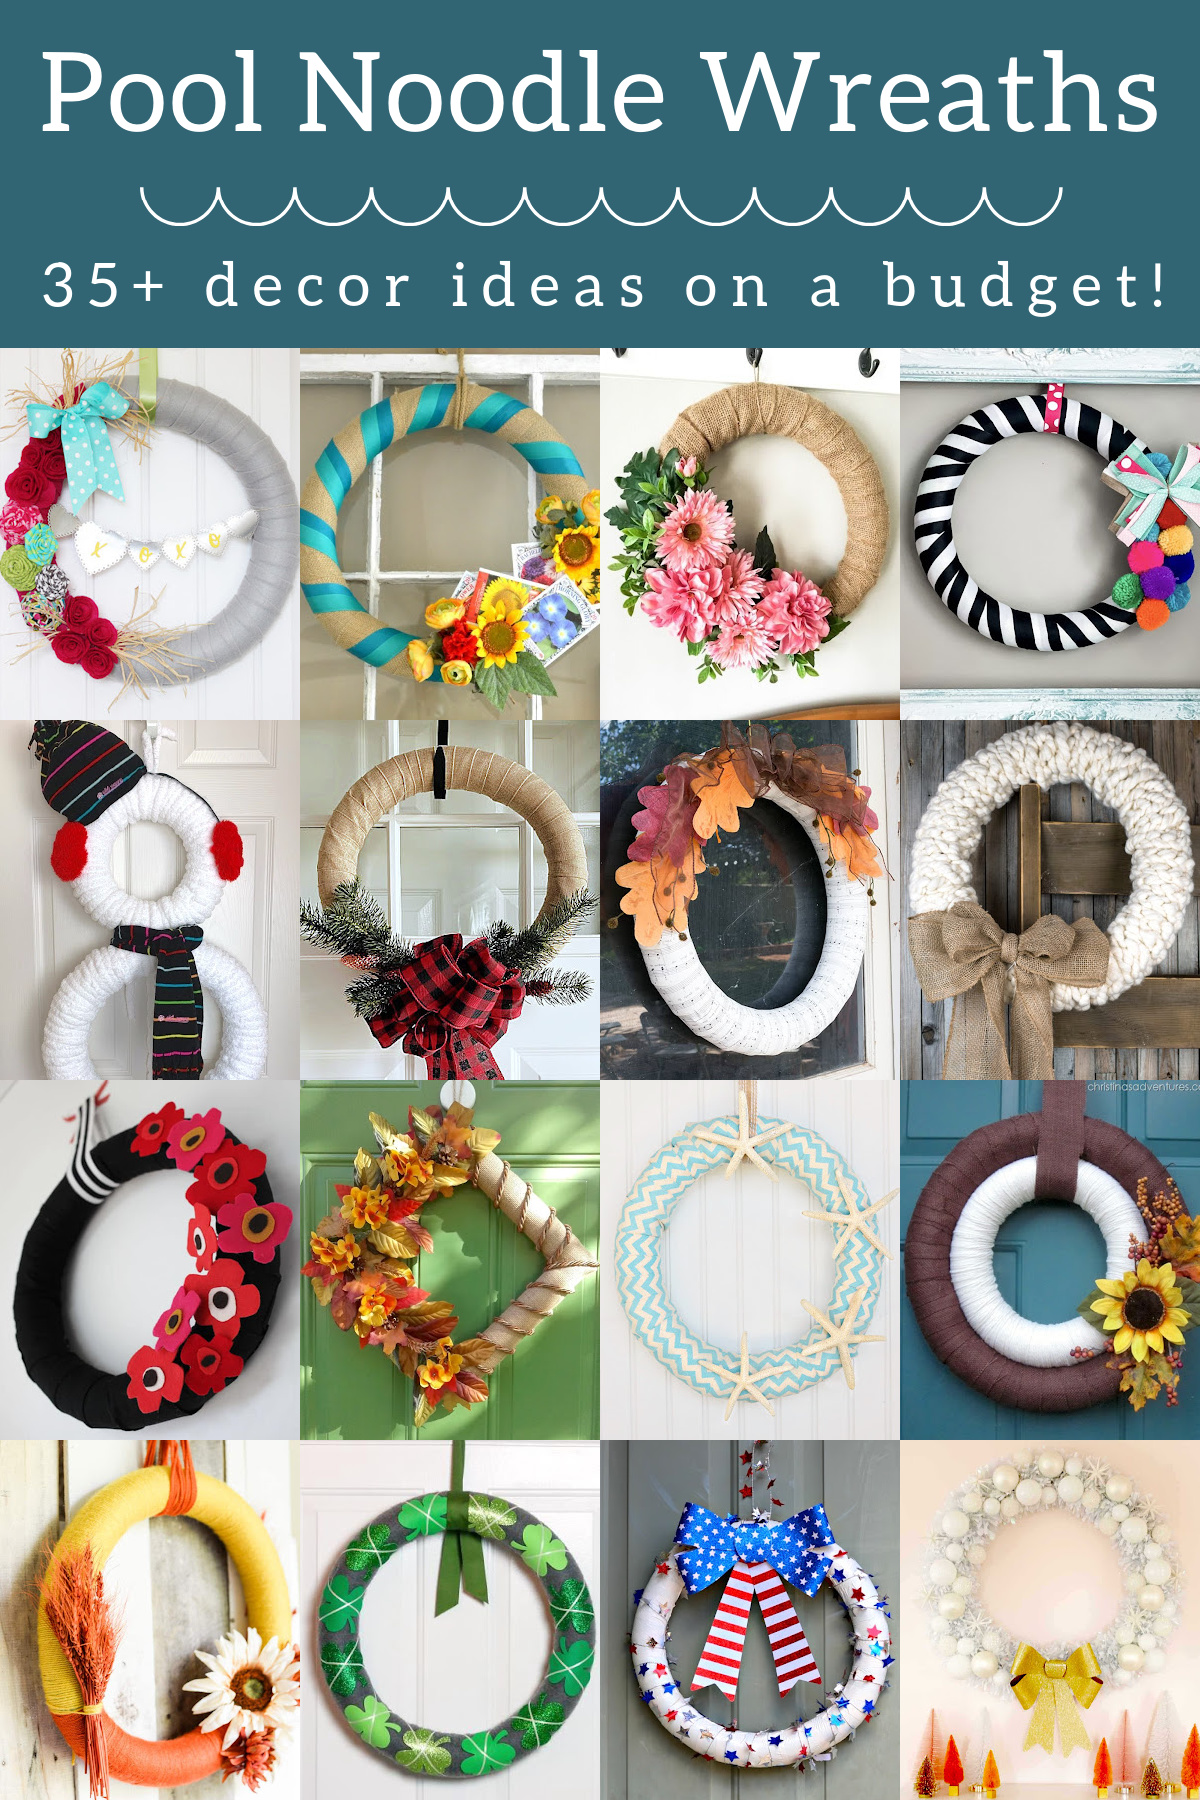 Pool Noodle Wreaths to Decorate Your Home